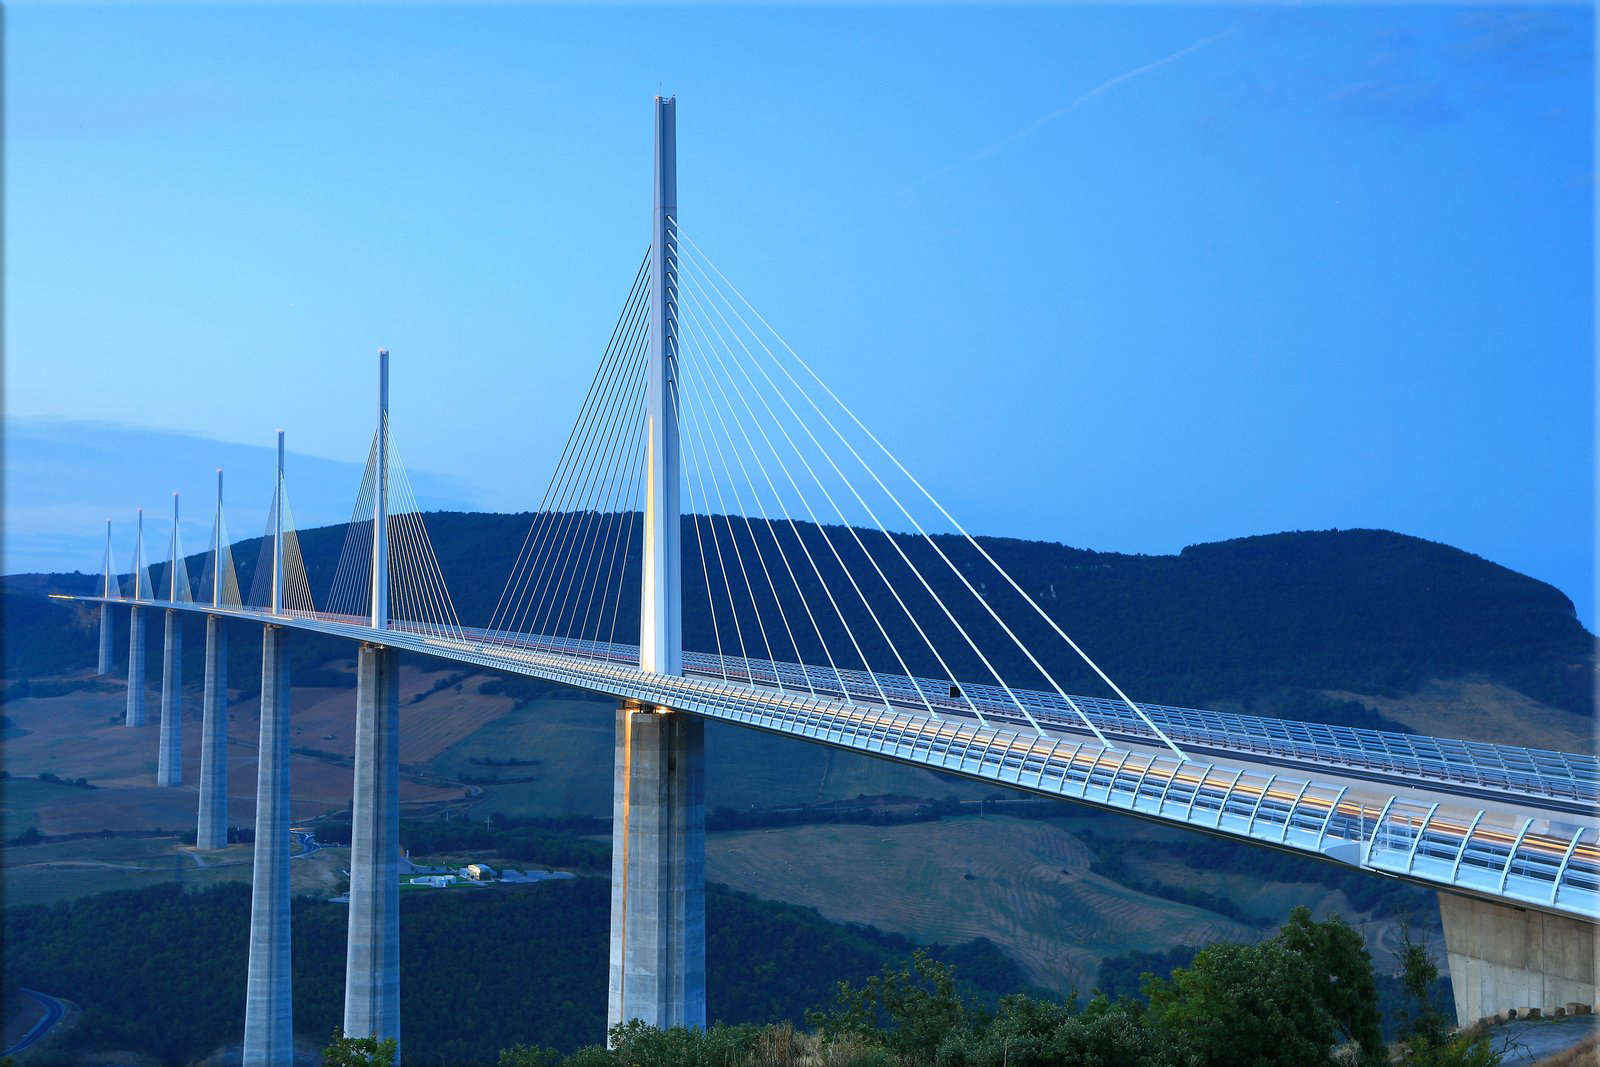 The Millau Viaduct, the tallest bridge in the world, near Millau, France officially opens on December 14th, 2004